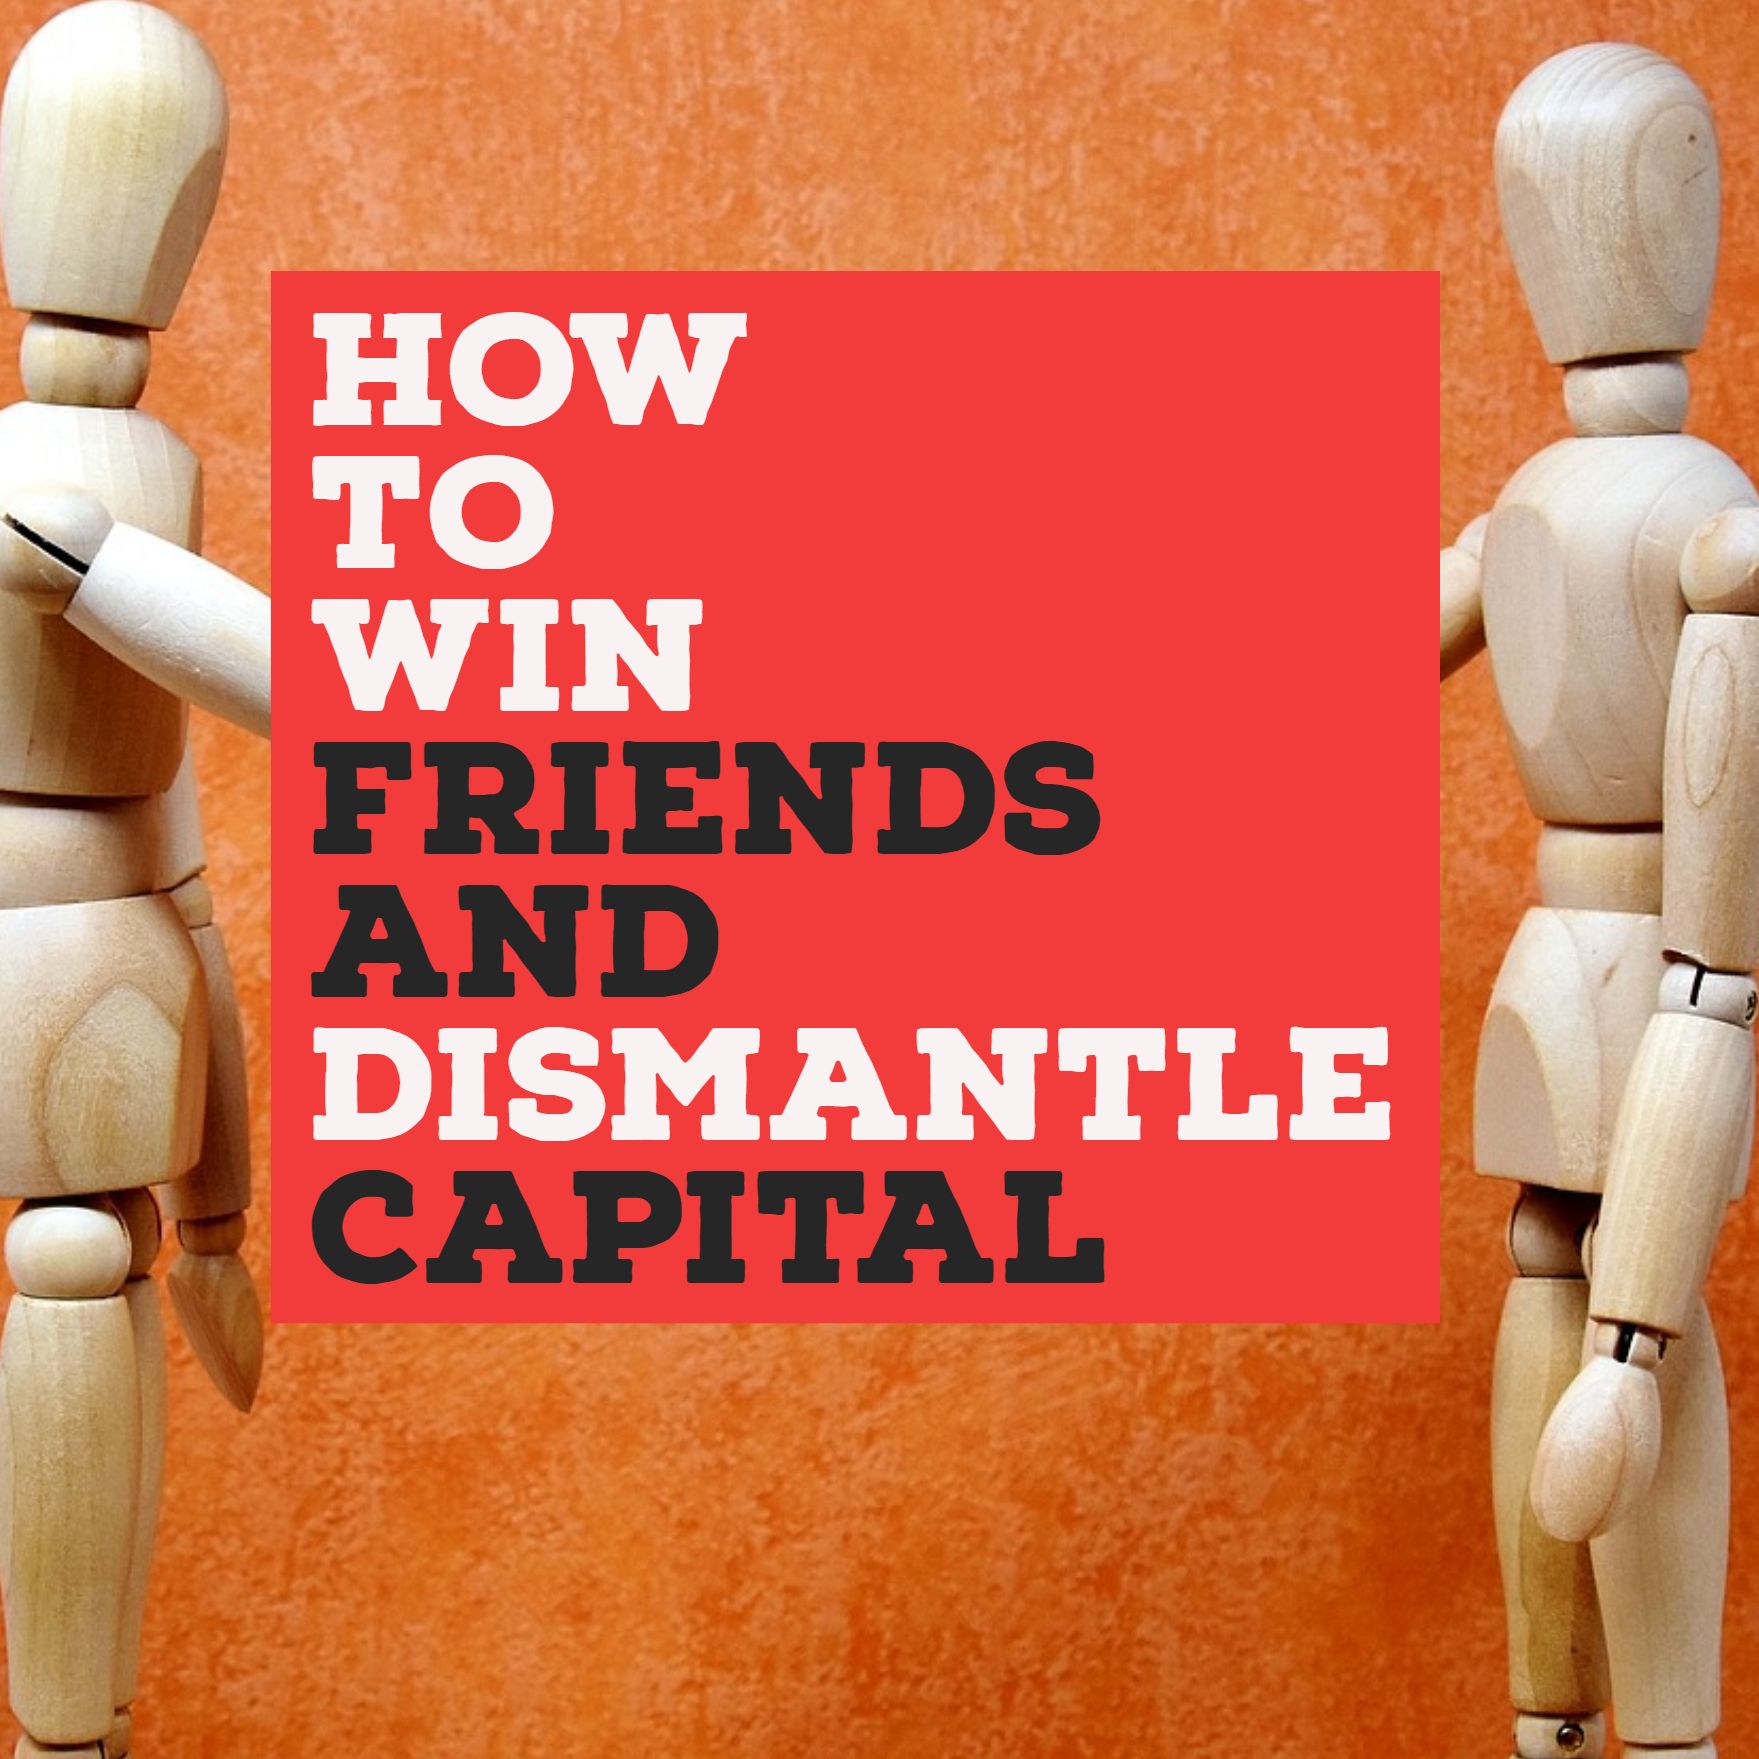 How To Win Friends and Dismantle Capital